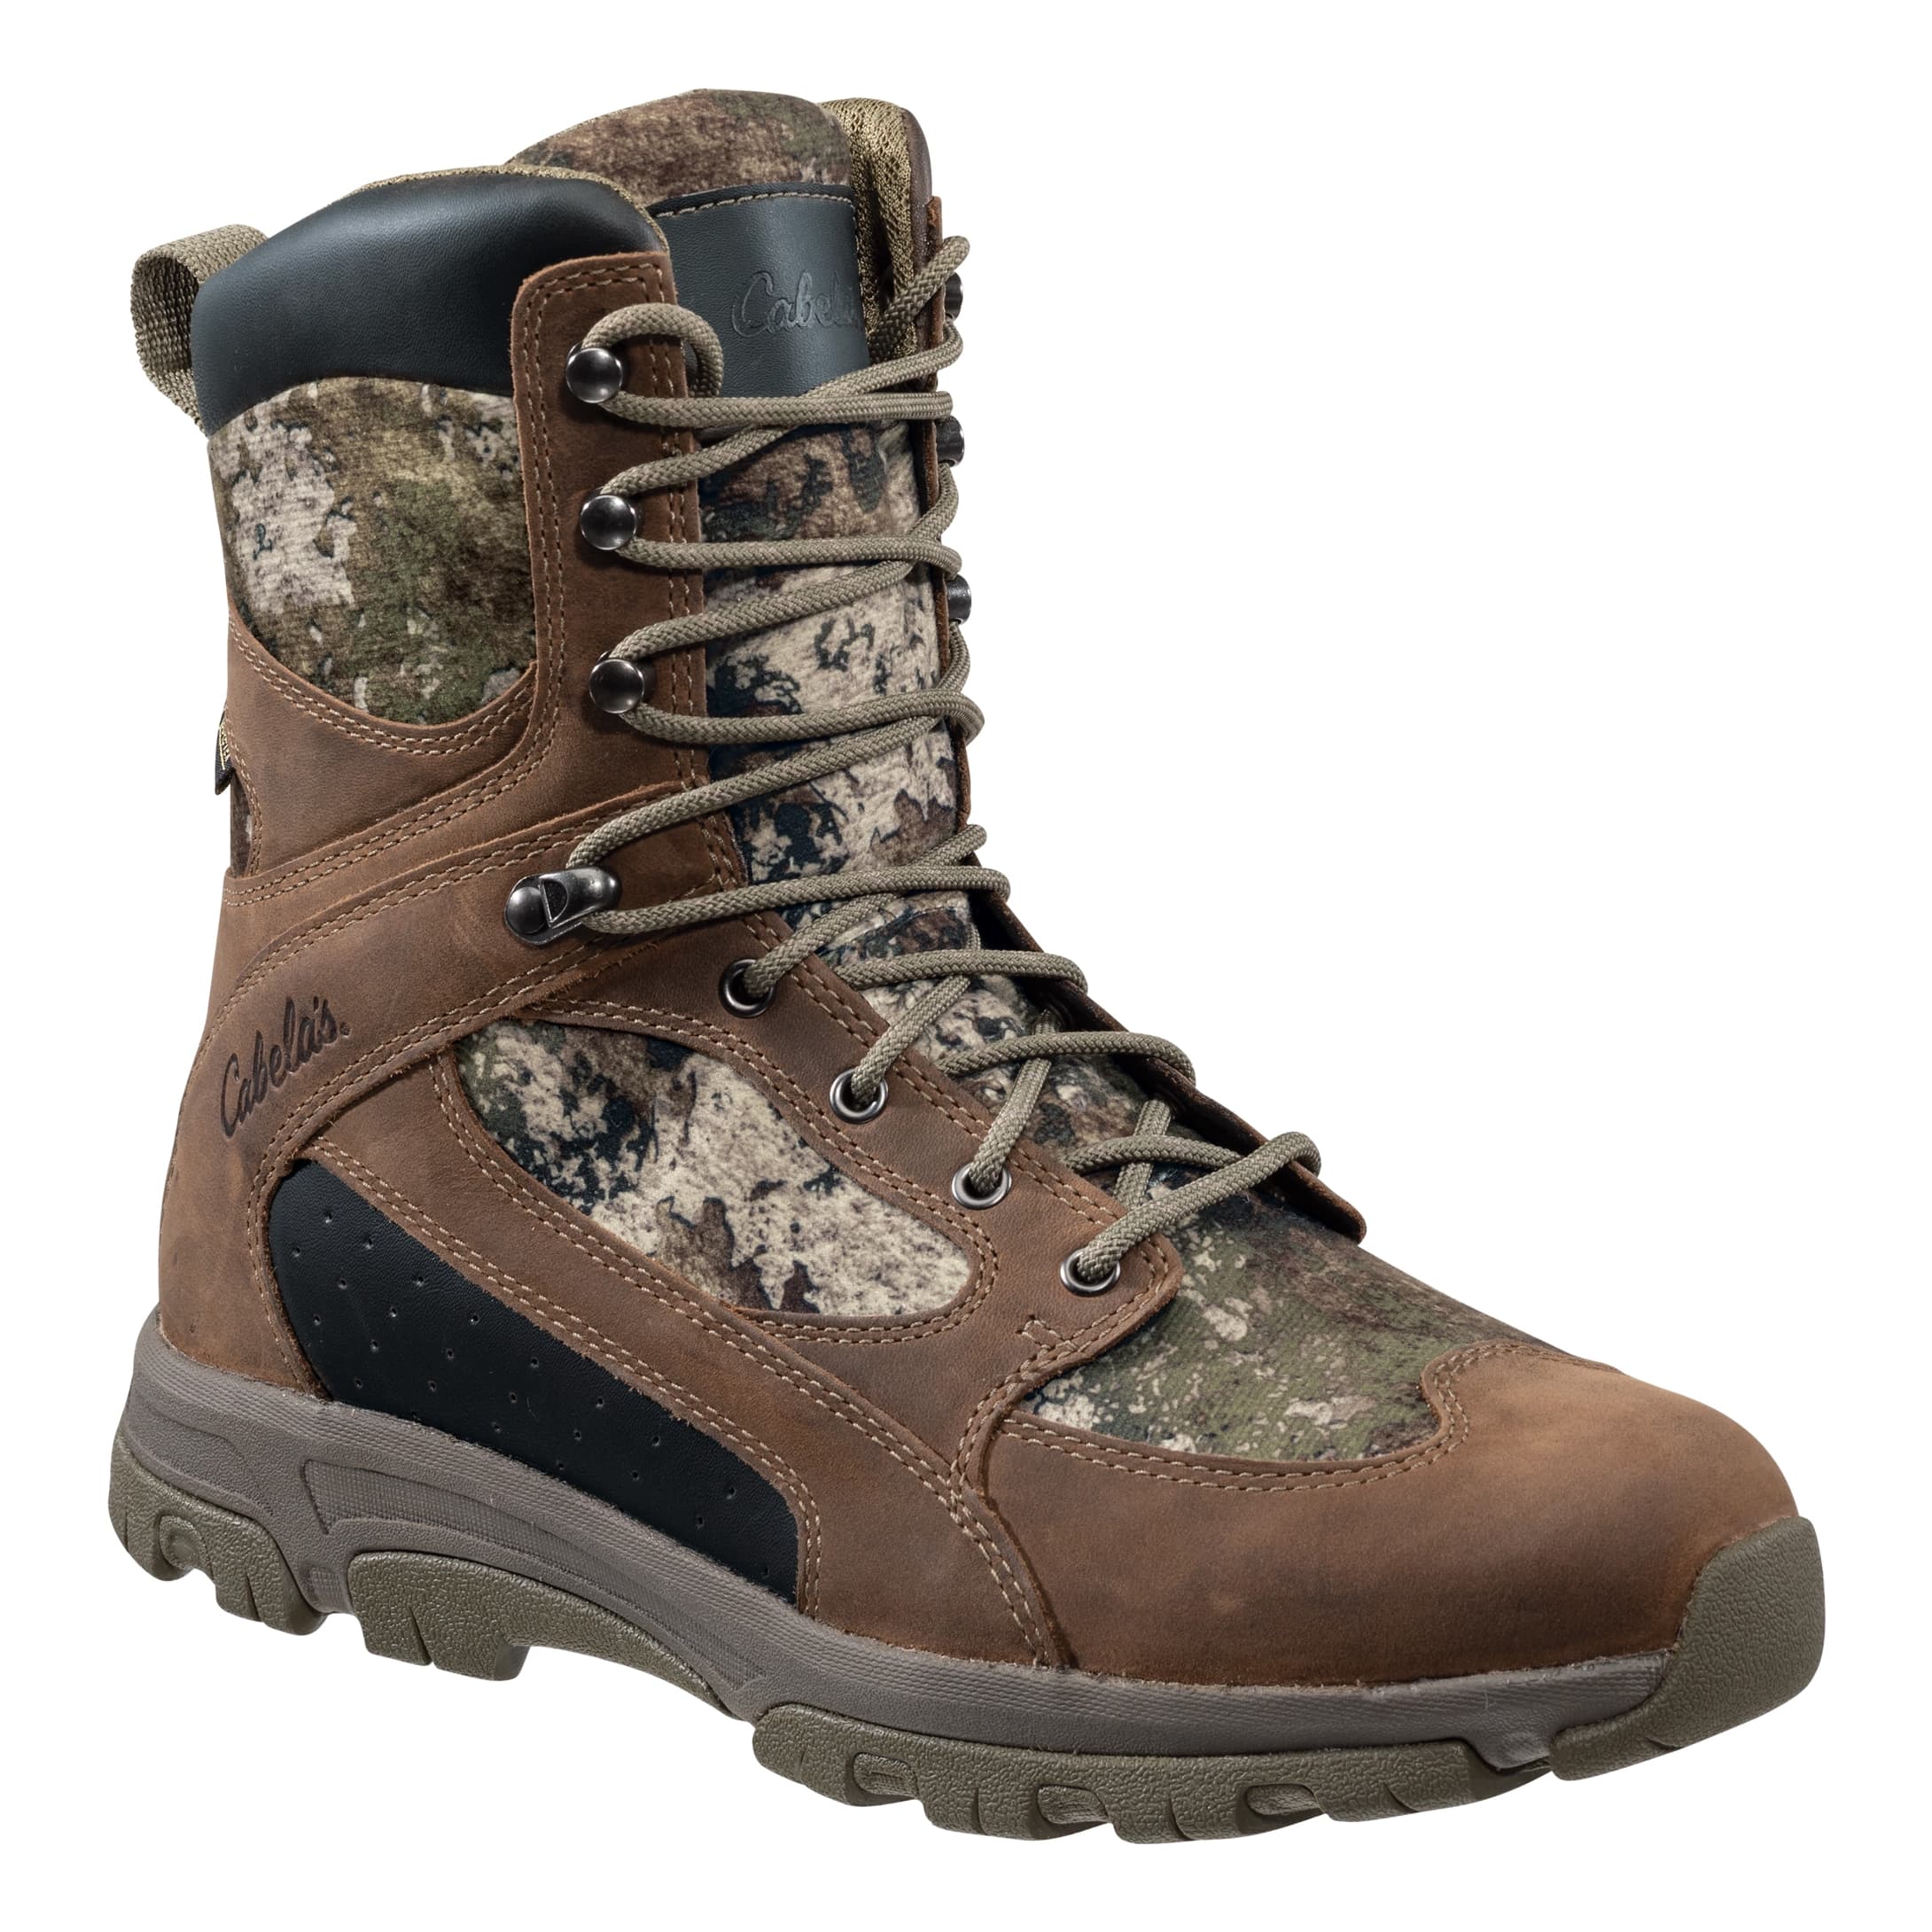 Cabela’s Silent Stalk 400-Gram Hunting Boots with GORE-TEX® - Strata